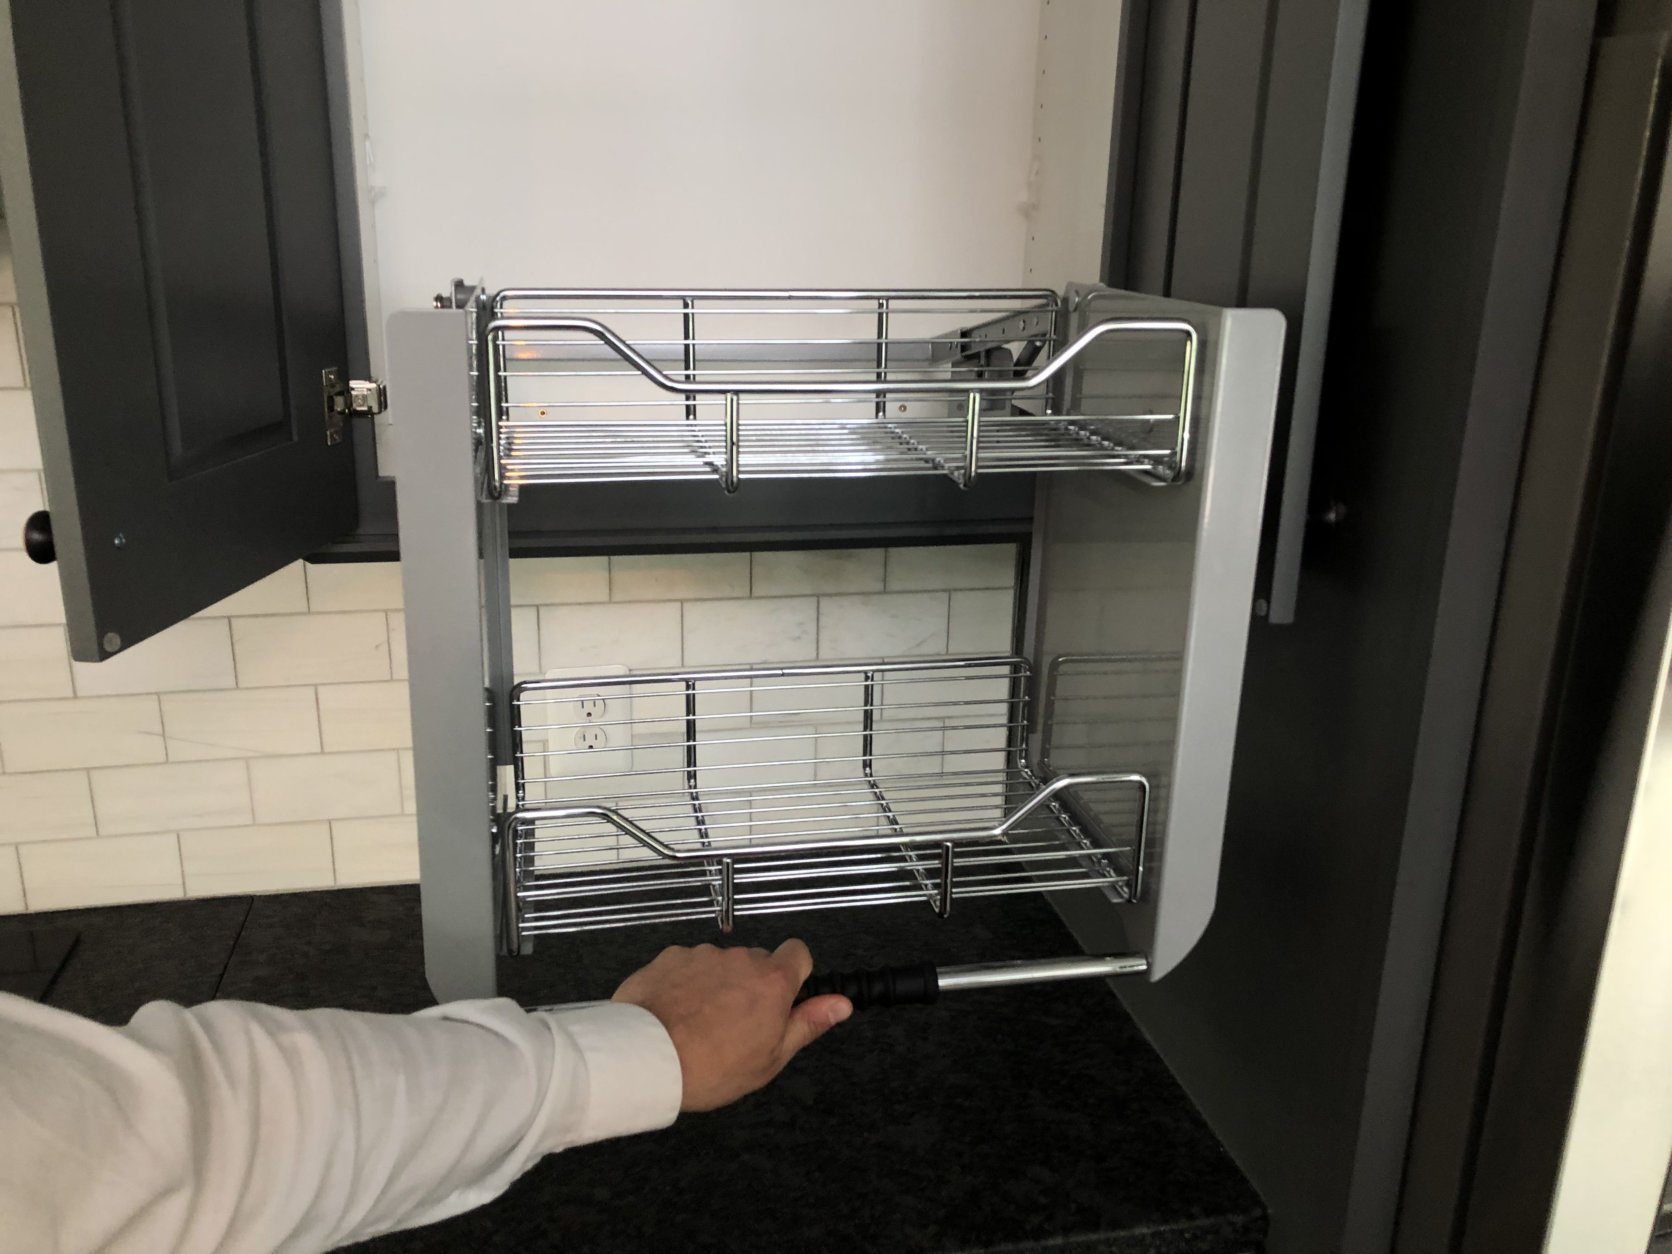 Racks slide out of cabinets for easy accessibility. (WTOP/Neal Augenstein)